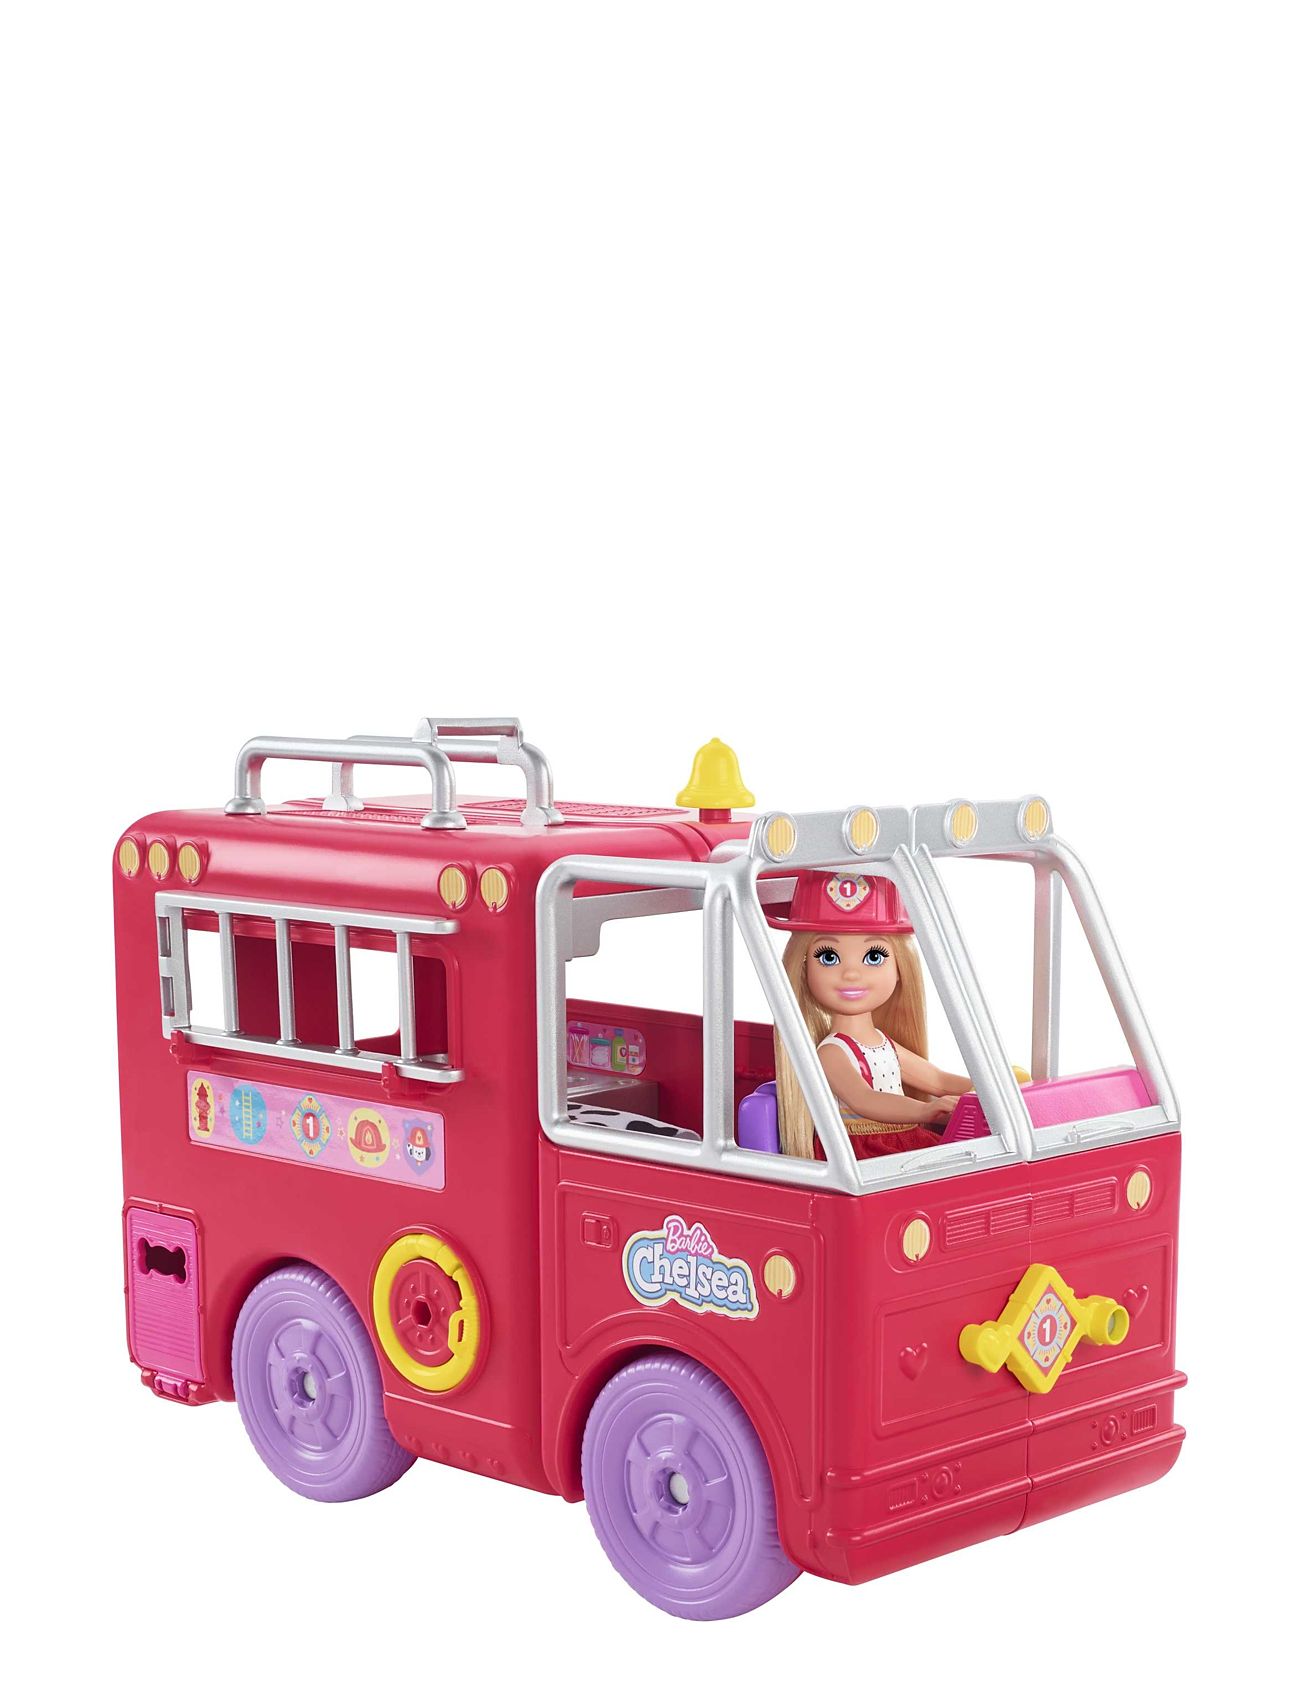 Chelsea Fire Truck Vehicle Toys Dolls & Accessories Dolls Multi/patterned Barbie